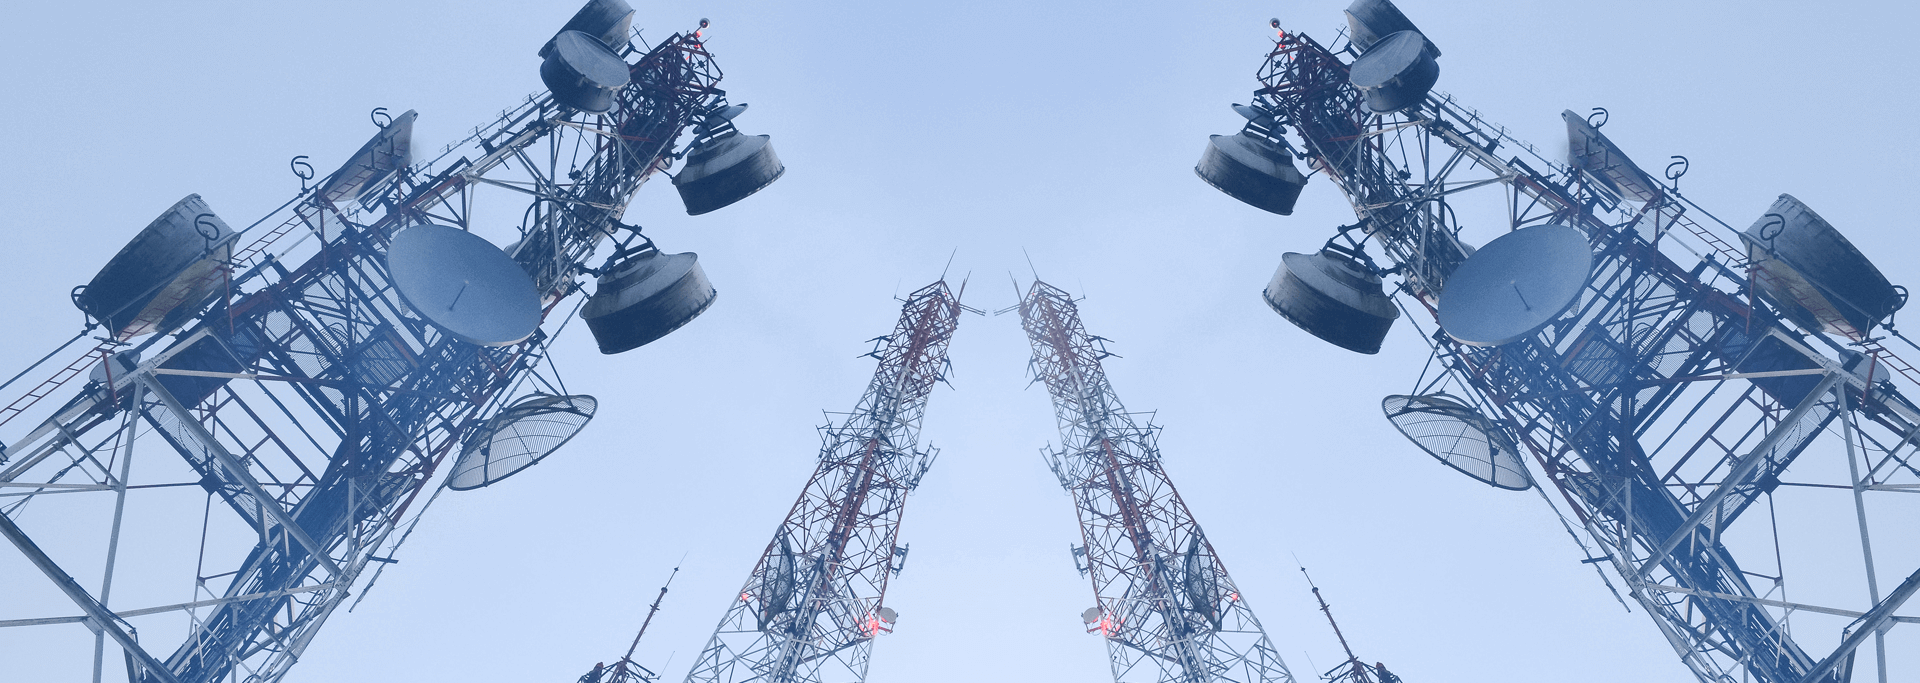 Telecommunication towers with antennas of bcs group